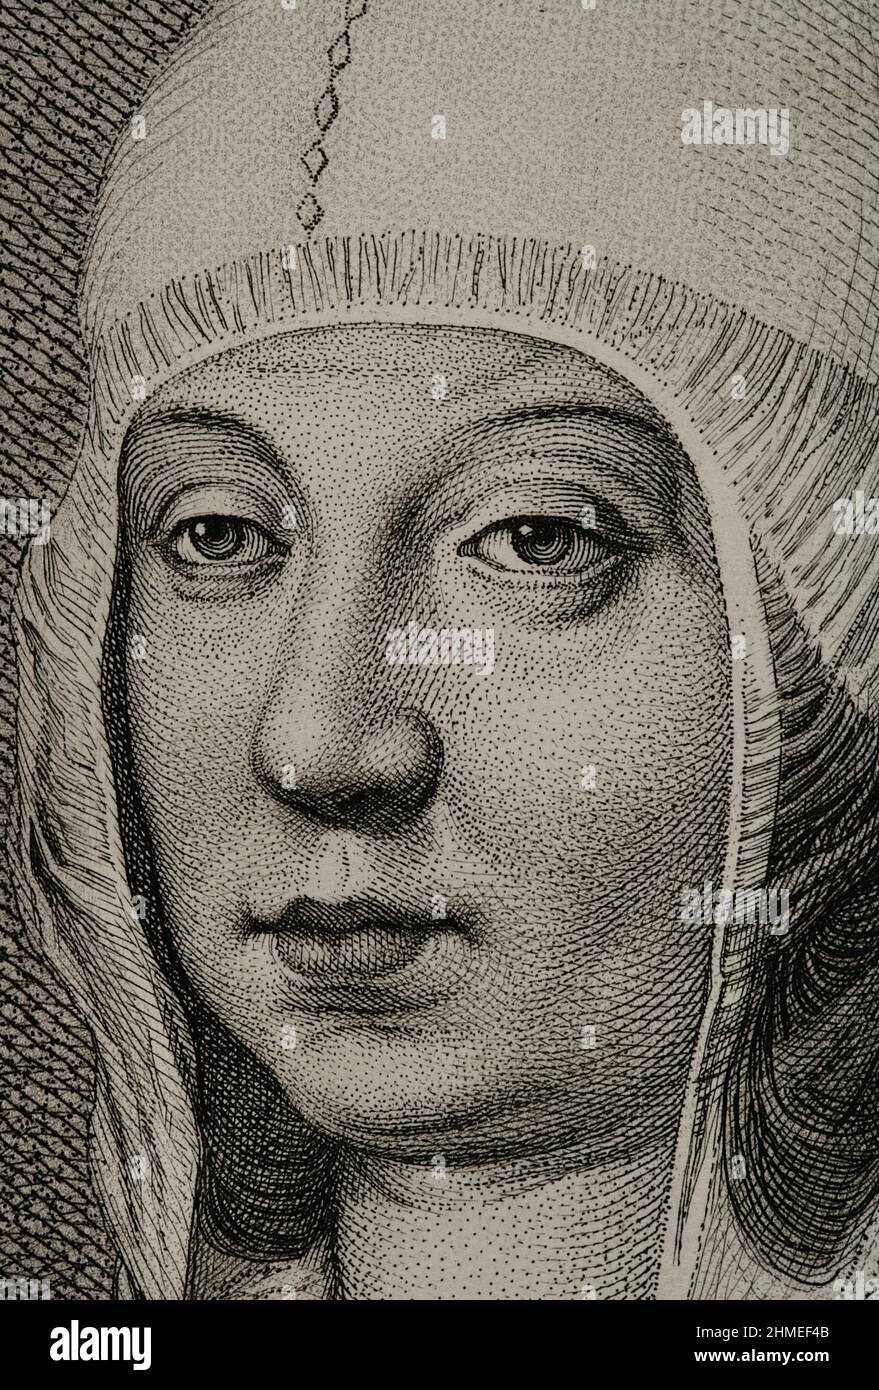 Isabella I (1451-1504). Queen of Castile (1474-1504). Queen consort of Aragon for her marriage to Ferdinand II of Aragon. Portrait. Engraving by Masson. Lithographed by Magín Pujadas. Detail. Historia General de España, by Modesto Lafuente. Volume II. Published in Barcelona, 1879. Stock Photo